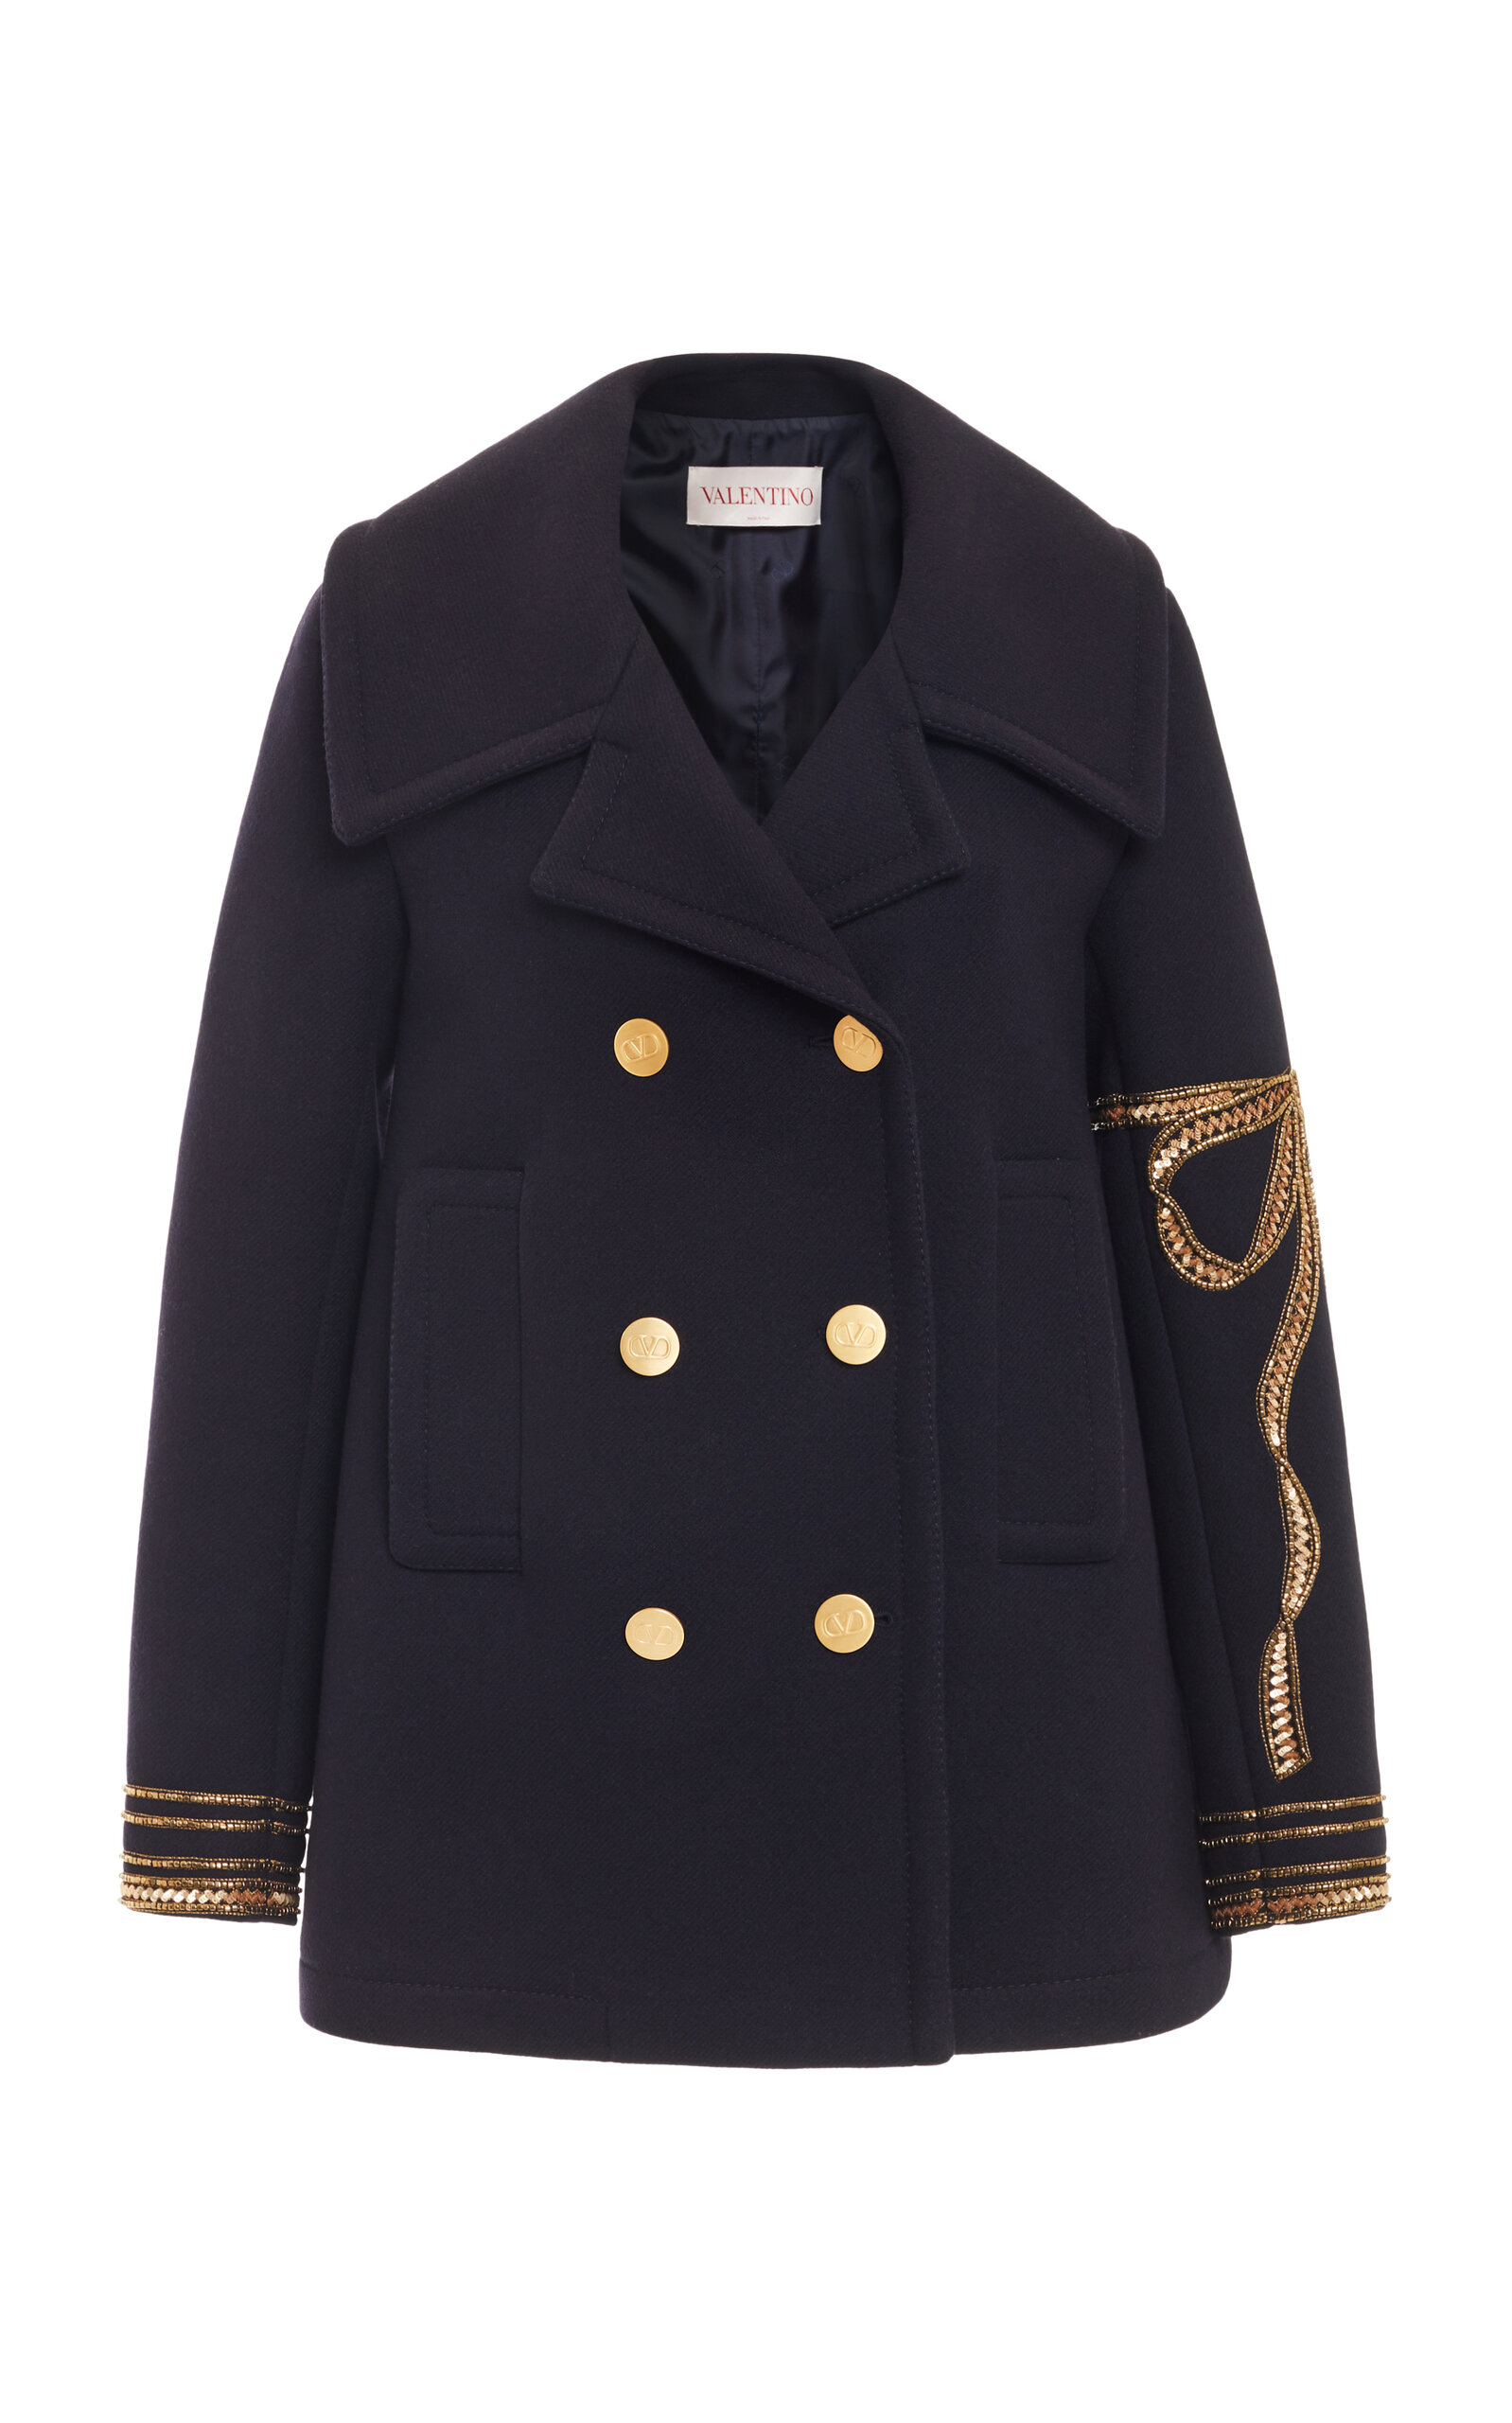 Valentino Women's Double Wool Military Jacket